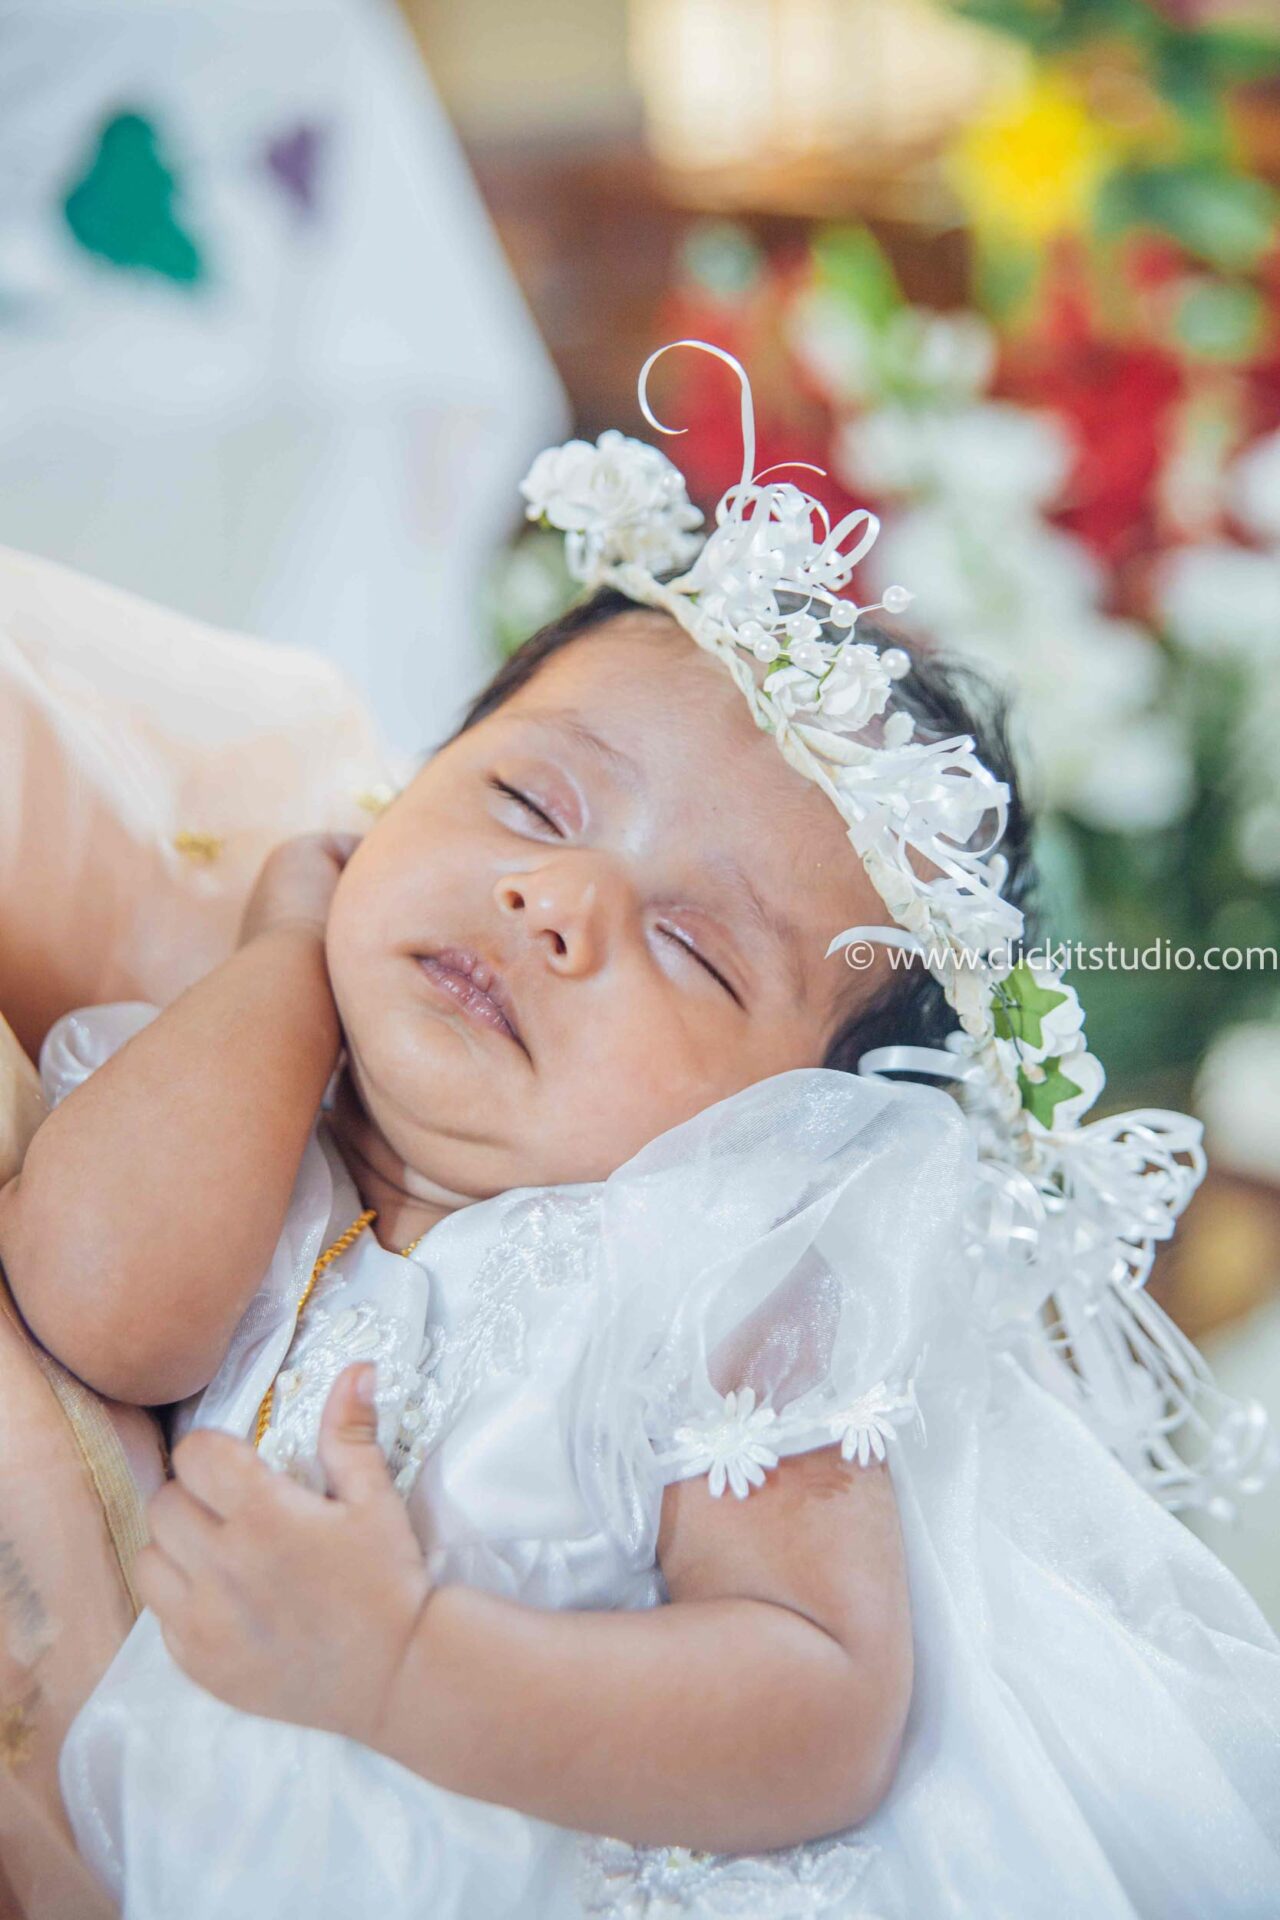 our Trusted Mumbai Photographers for Baptism Events